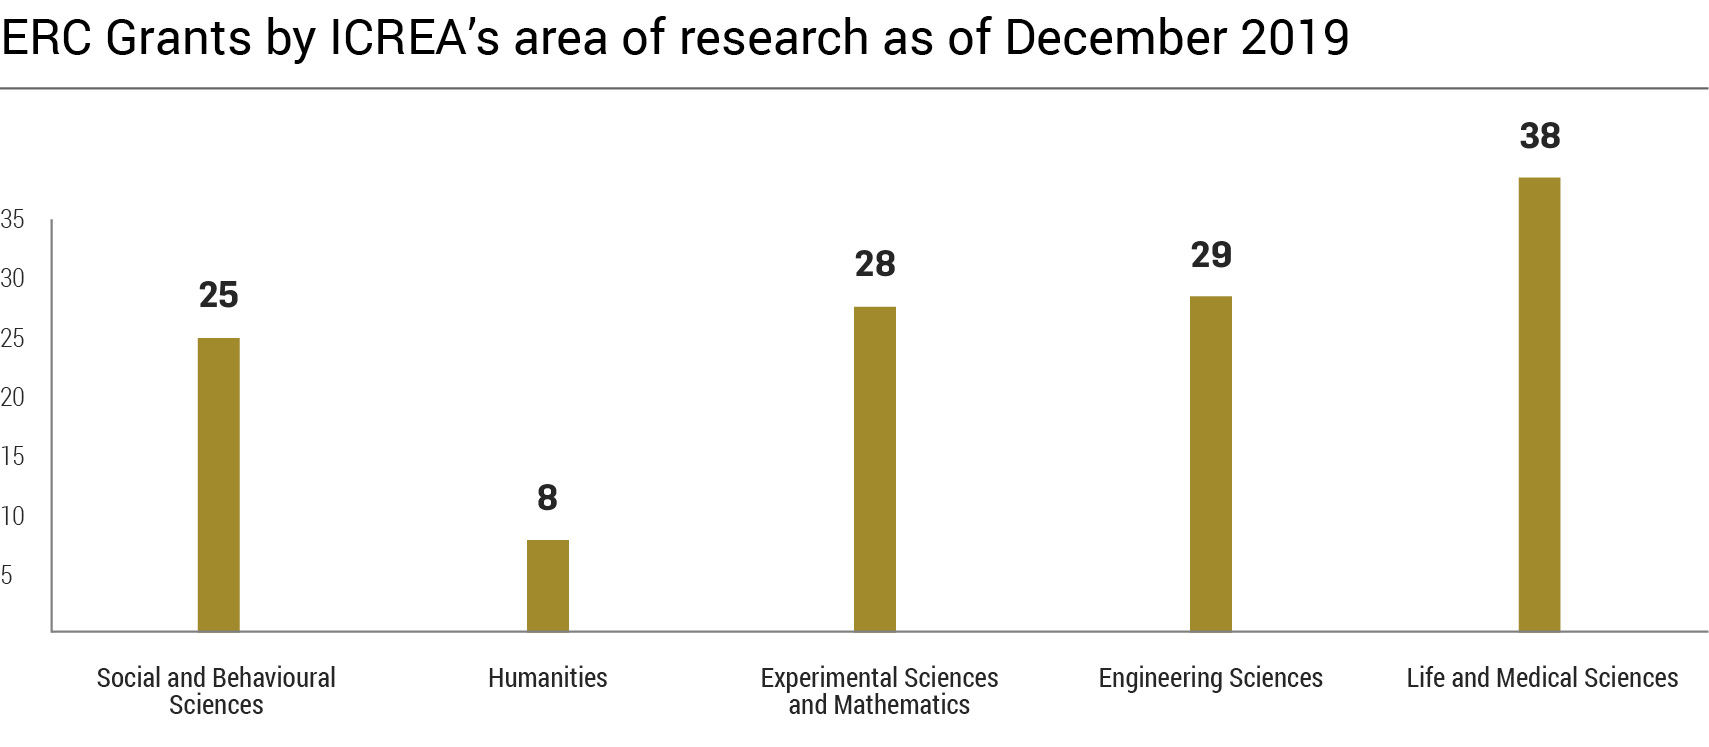 ERC Grants by ICREA’s area of research as of December 2019